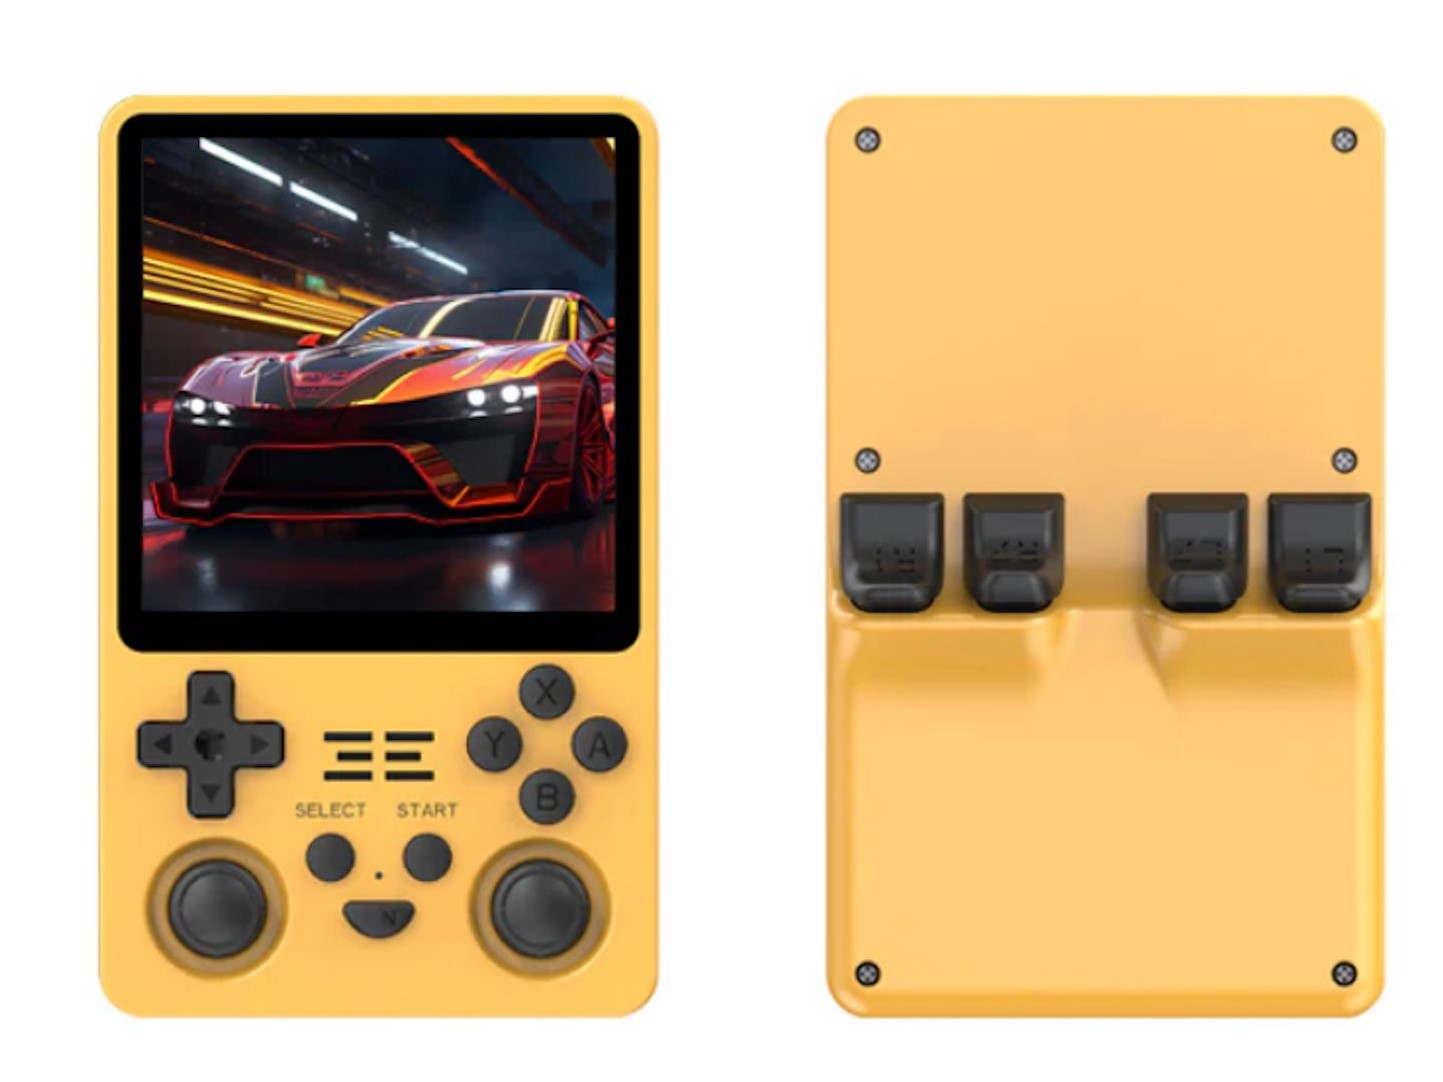 RGB20SX: New handheld games launched with a 1:1 display and also two analog sticks